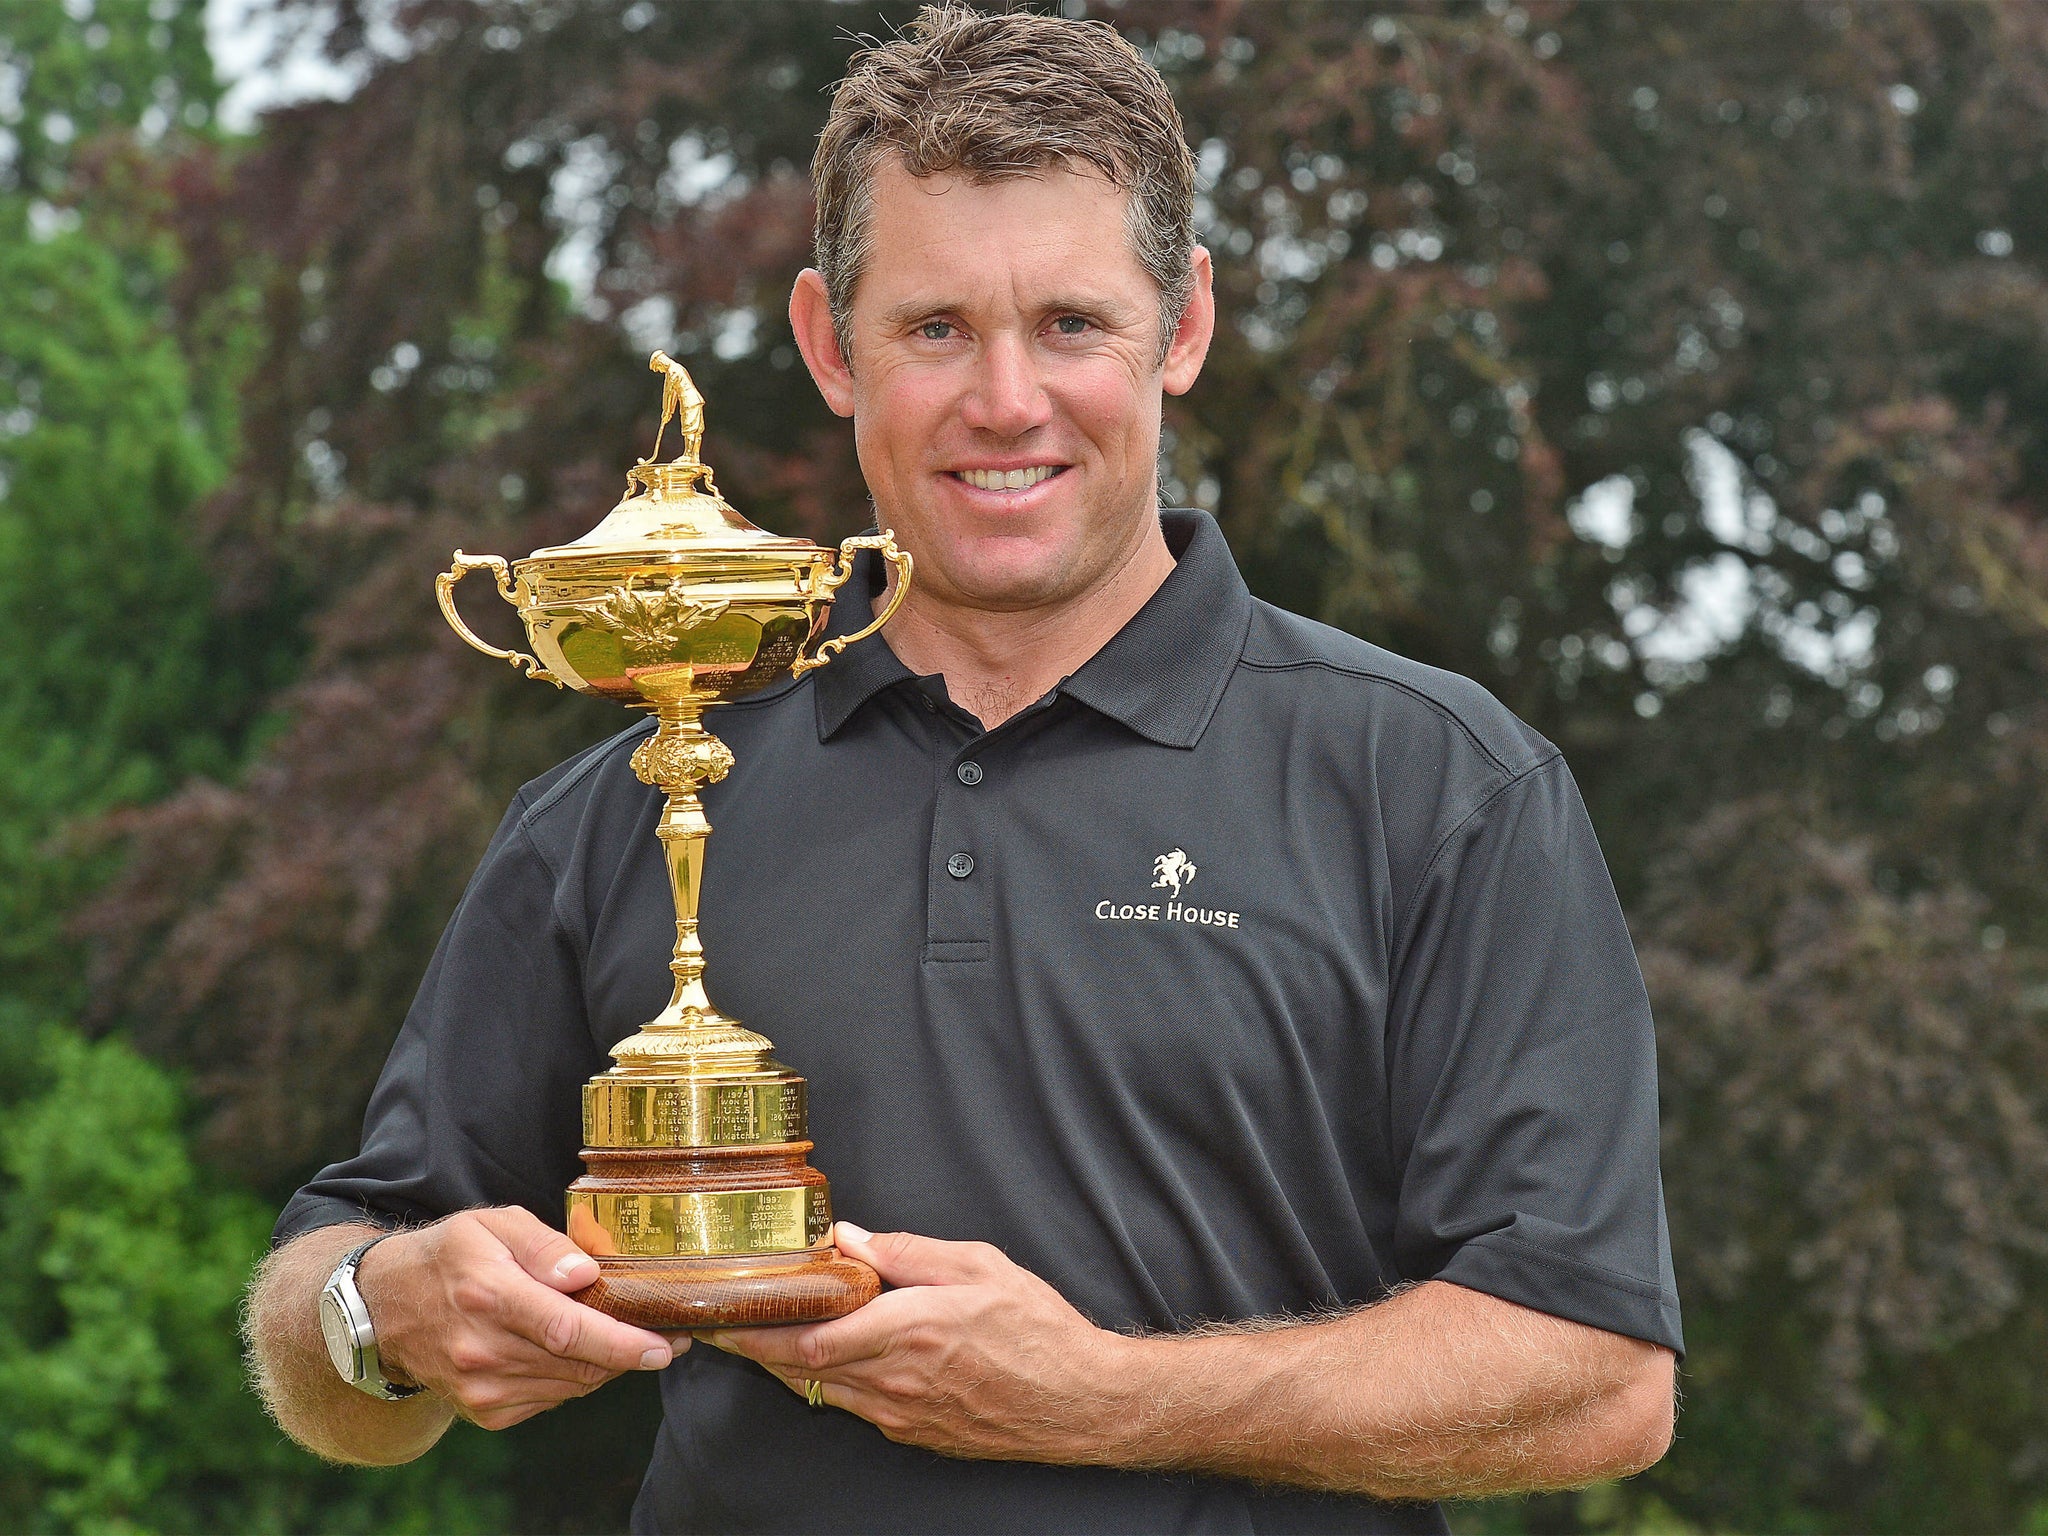 Lee Westwood shows off the Ryder cup which he brought along as he opened the Lee Westwood Filly Golf Course on Tuesday